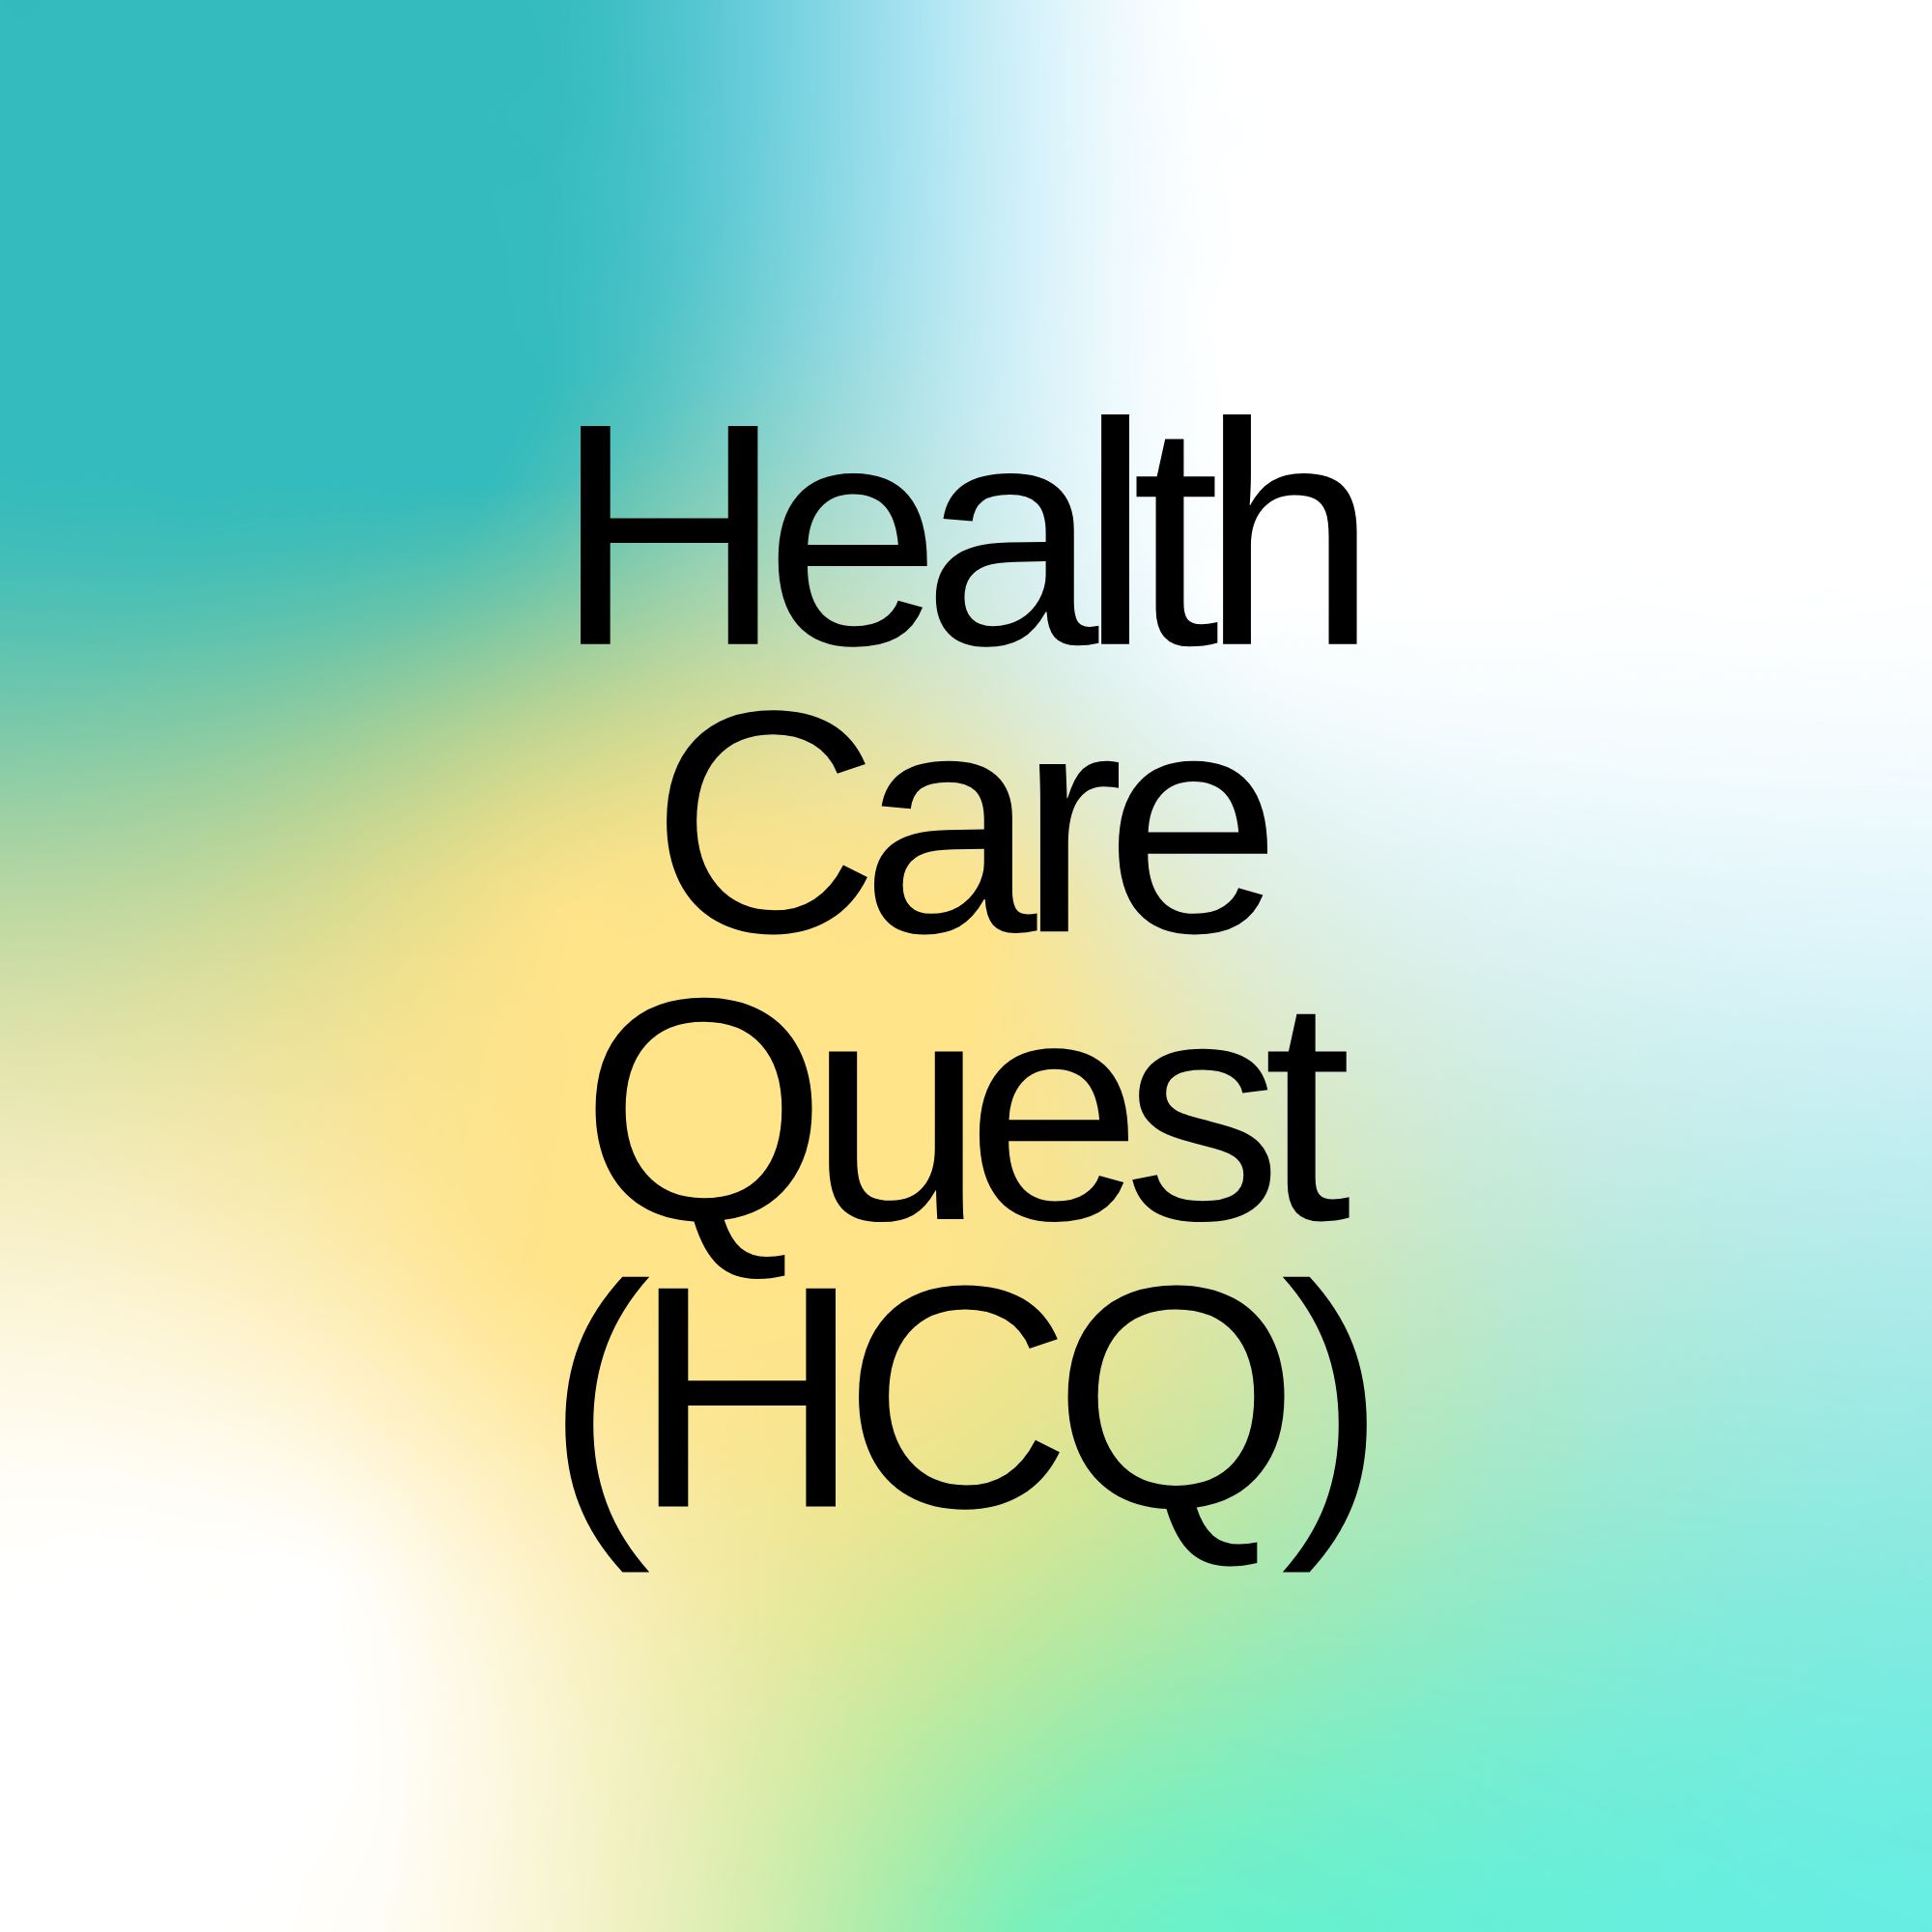 Health Care Quest